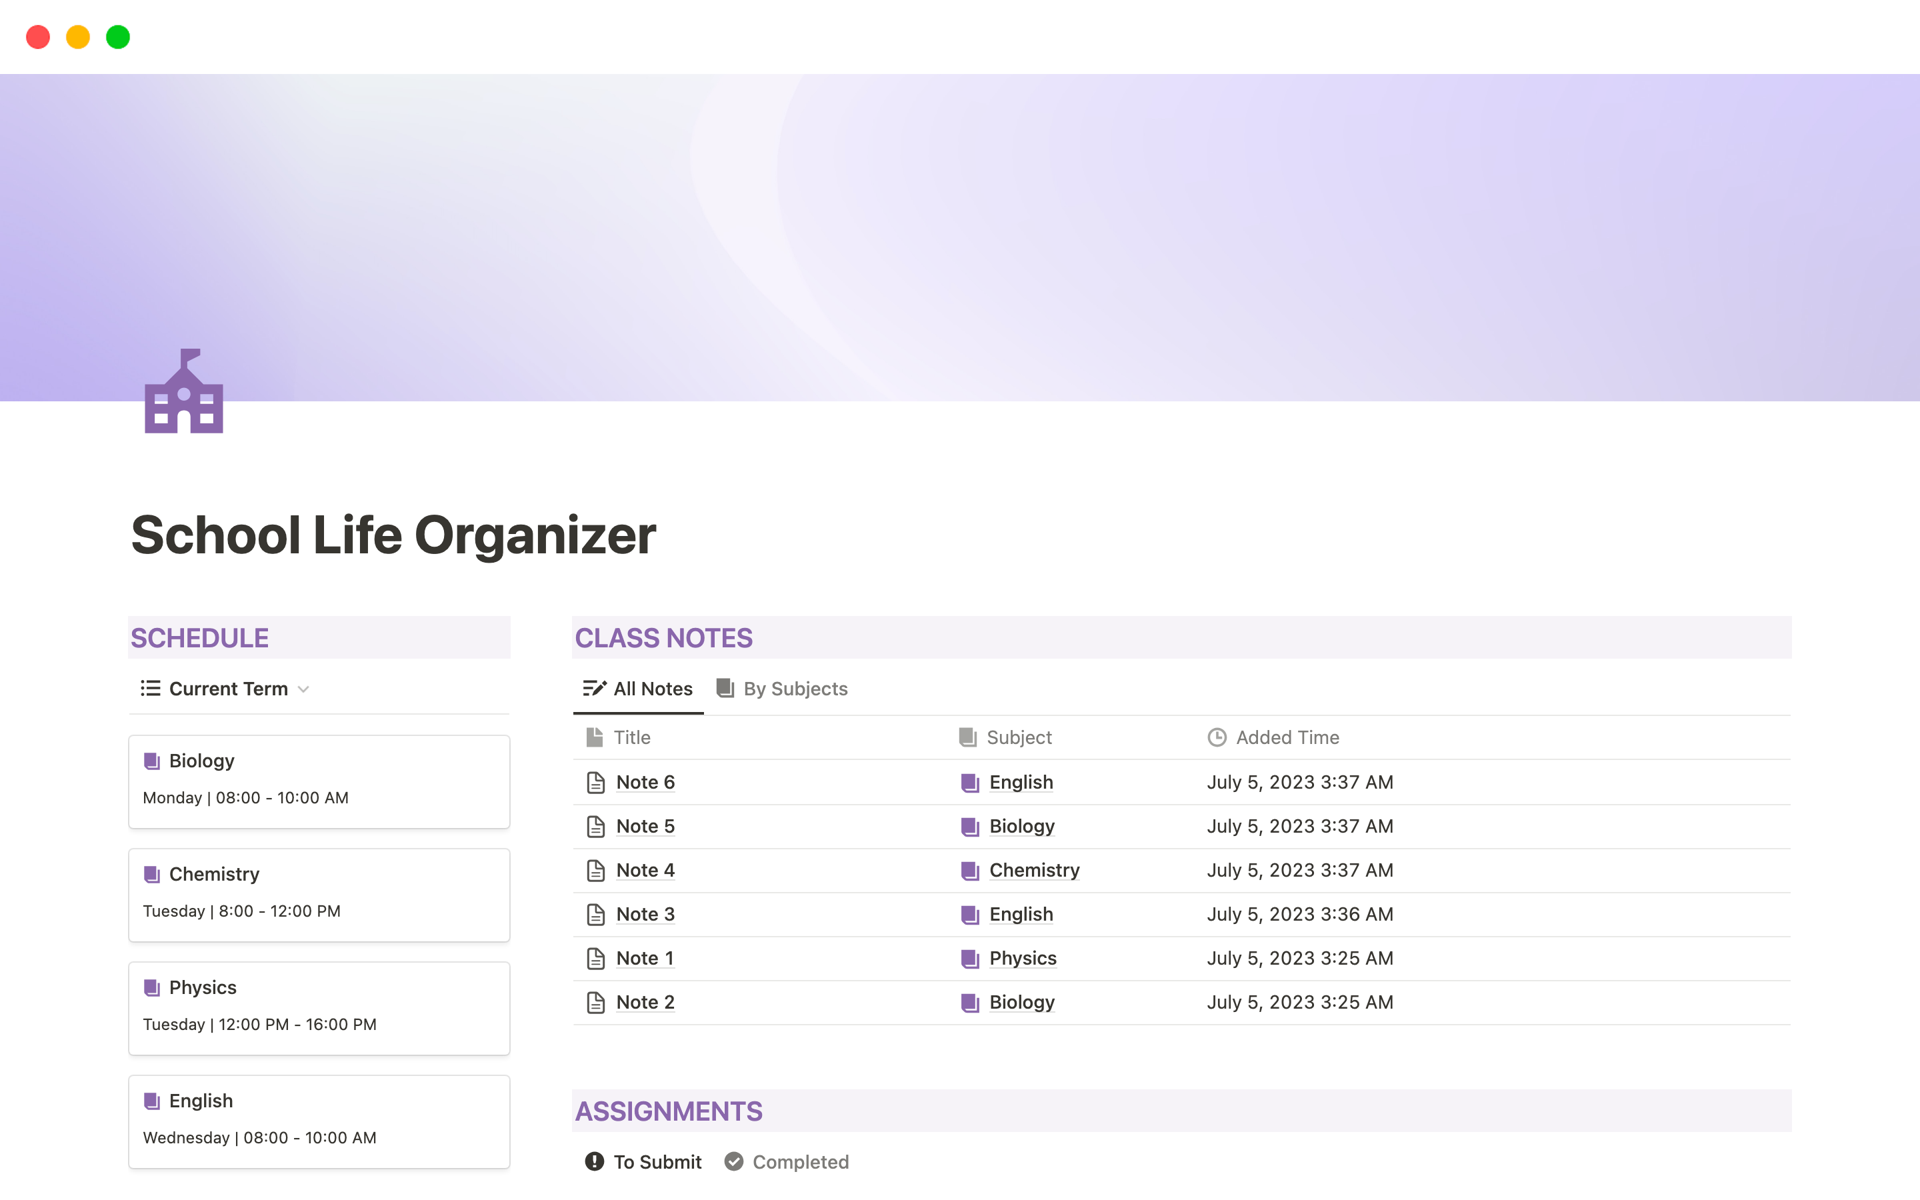 The School Life Organizer is a versatile Notion template that helps students stay organized by providing a single place to see their class schedule, notes, and assignments.